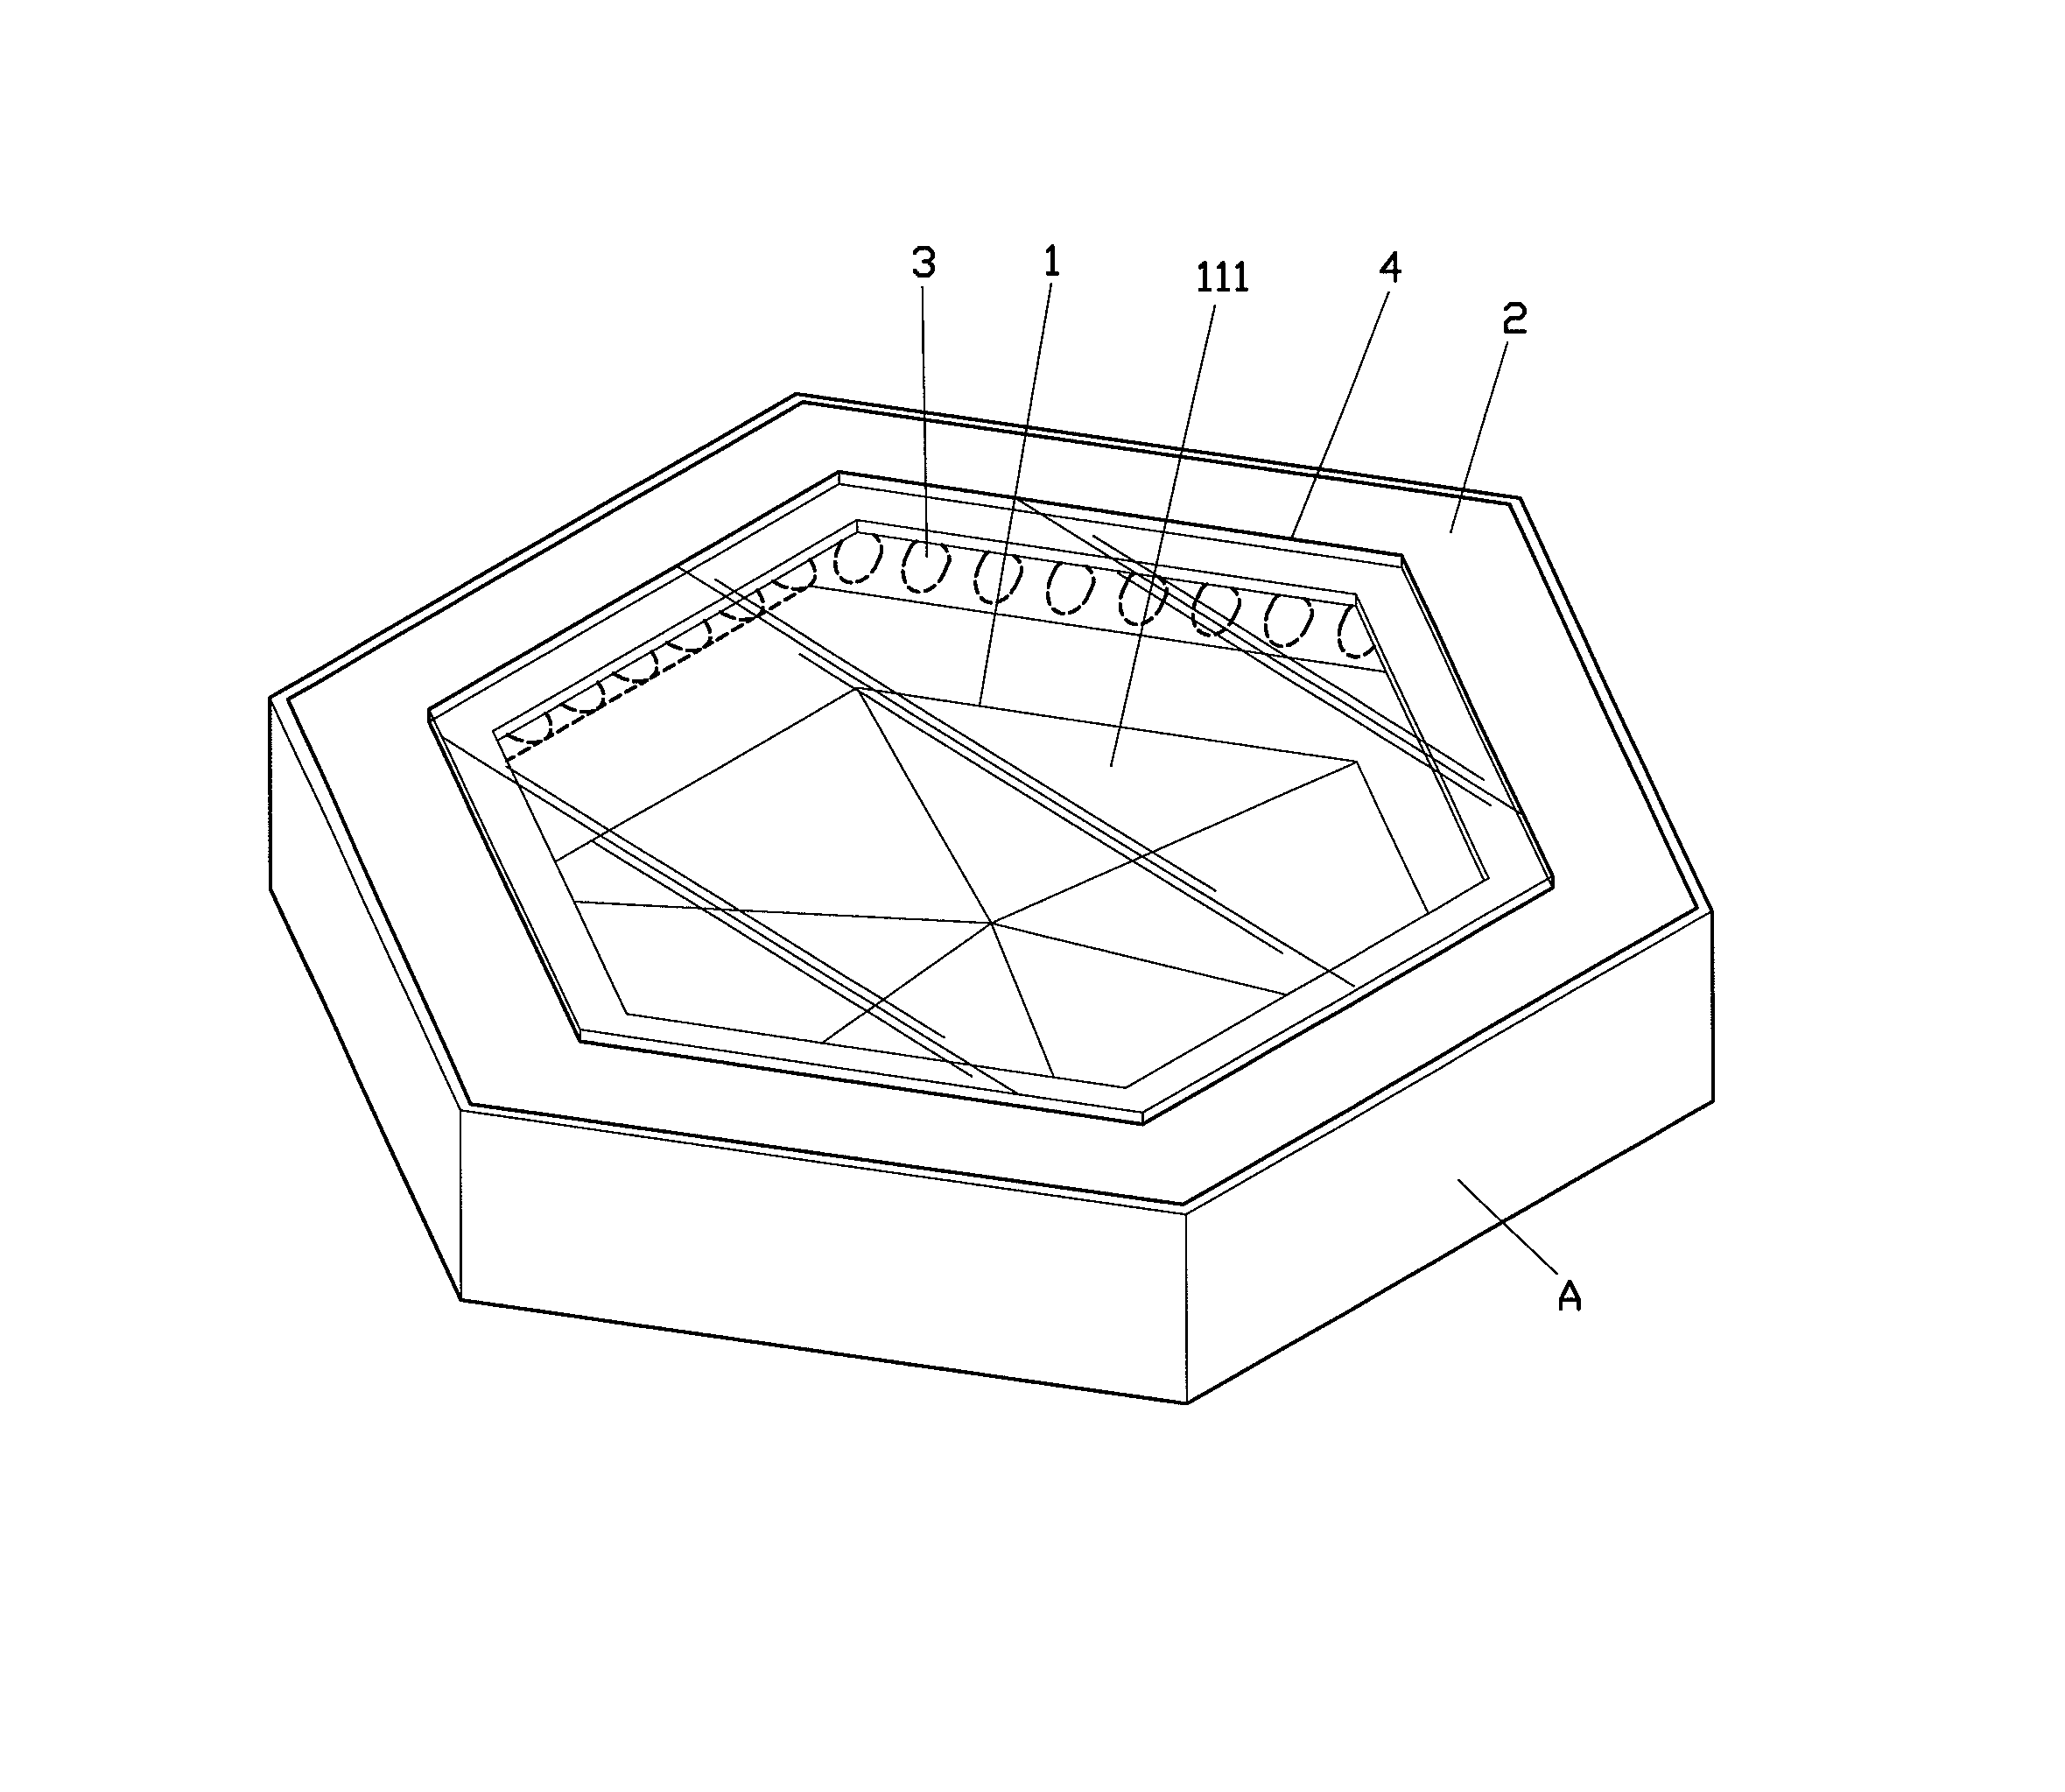 Polygonal radiation module having radiating members without light guiding board